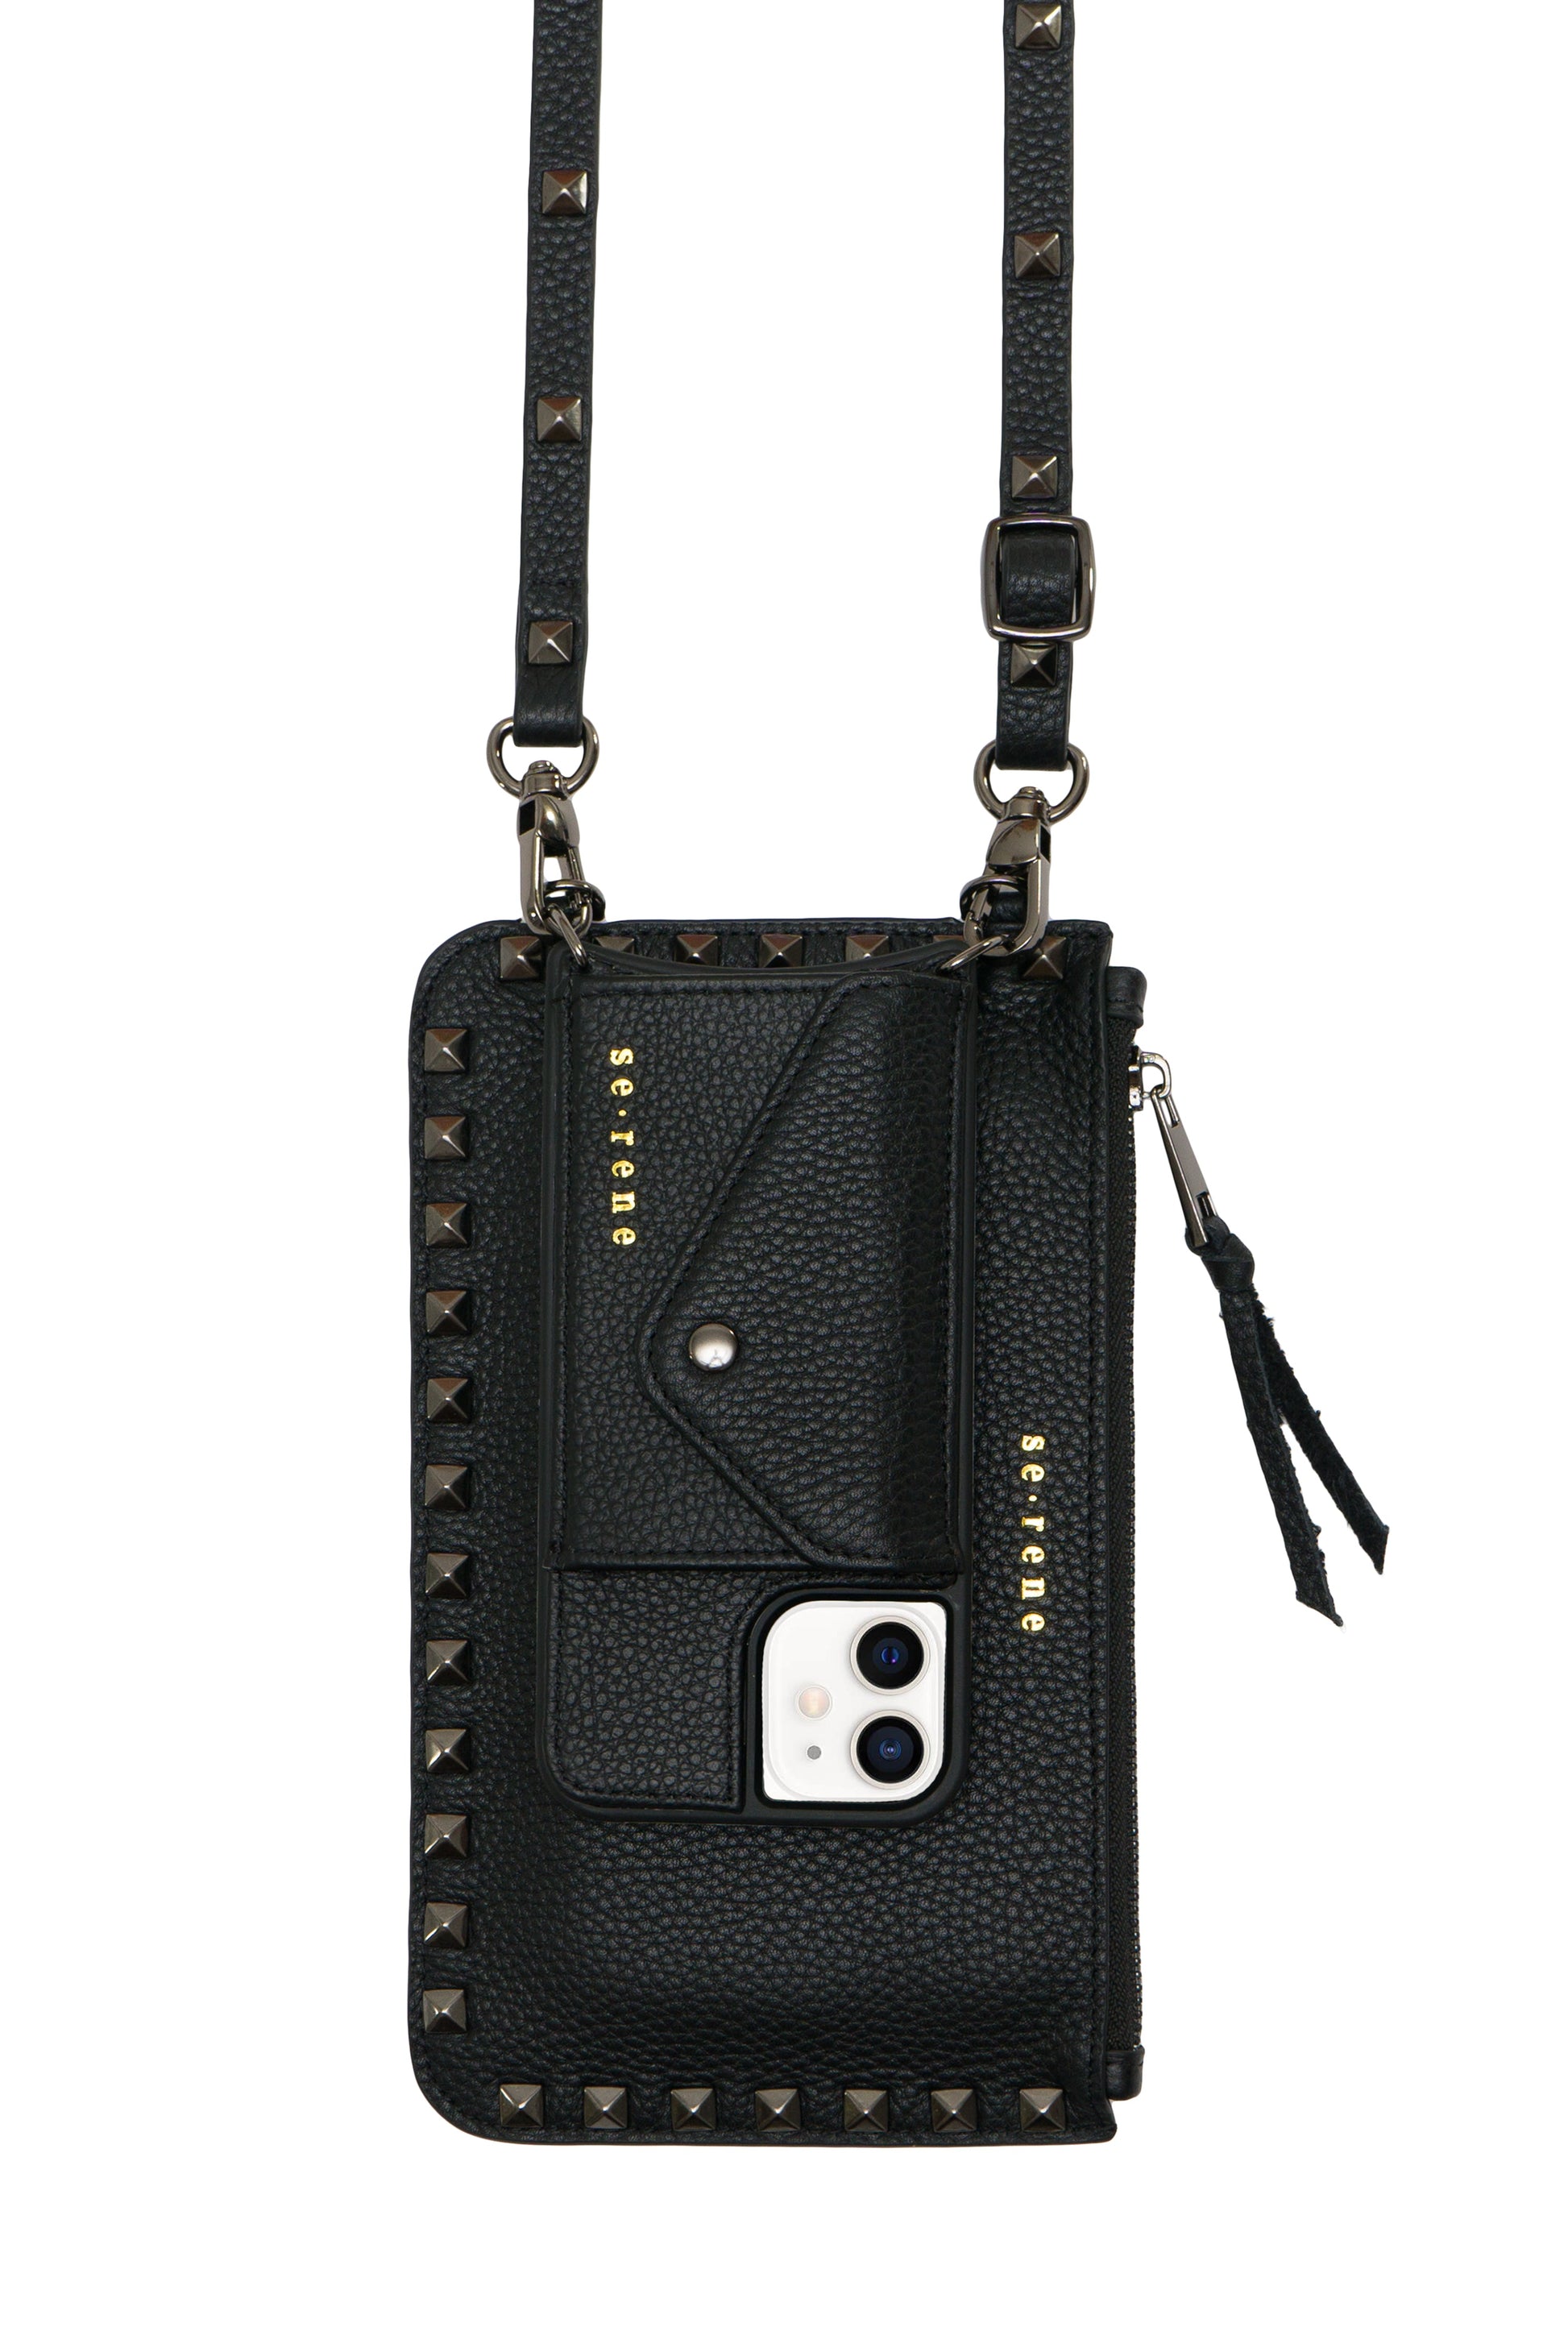 Bandolier Pebble Leather iPhone 13 Pro Case in Black/Pewter w/D